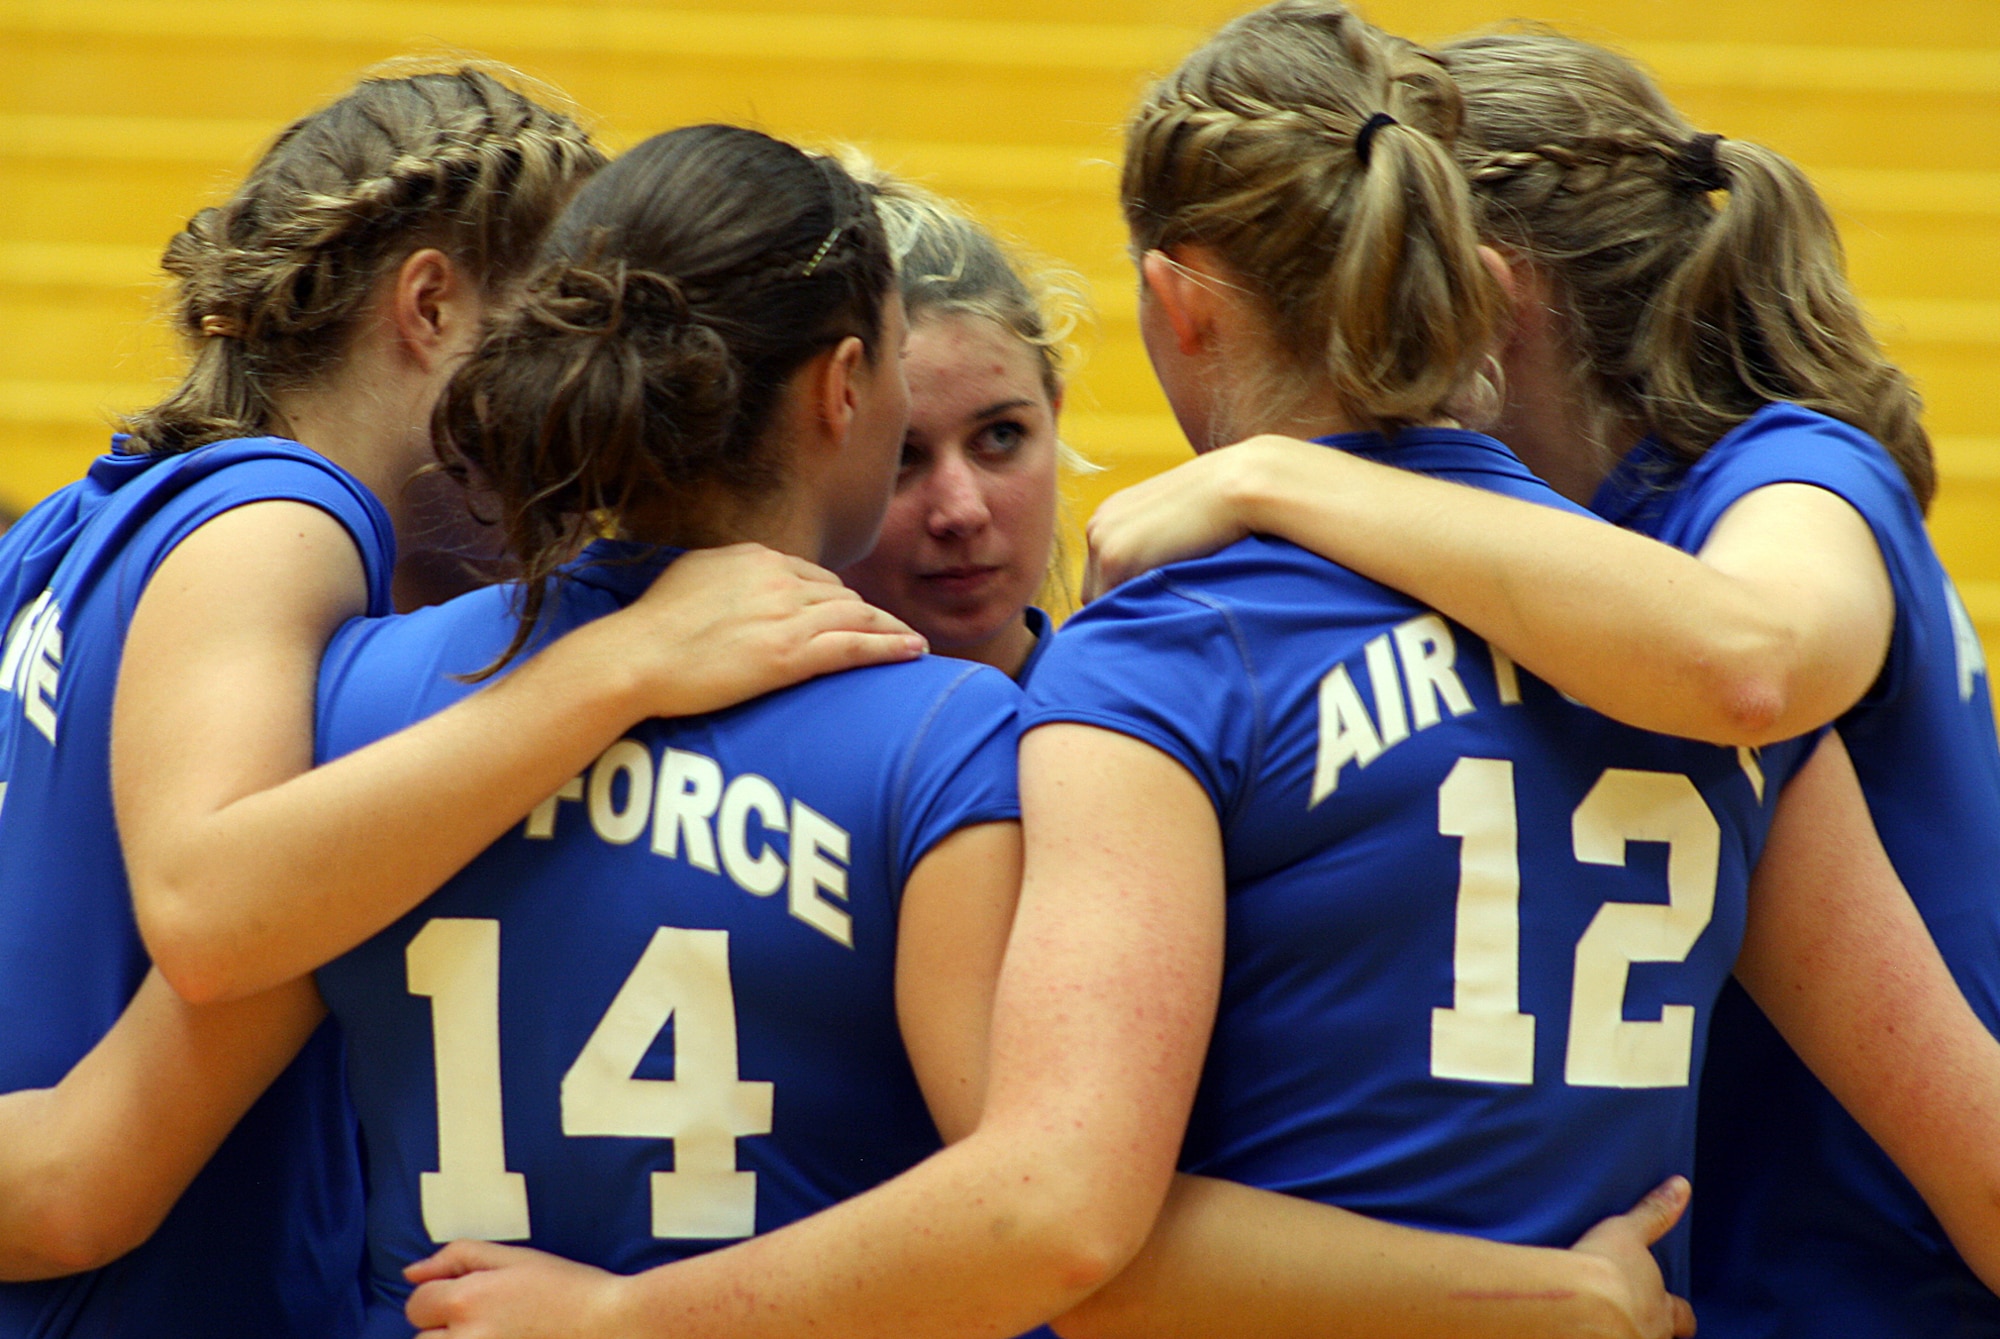 Air Force volleyball team members huddle during a match at a tournament in Denver Sept. 4. Air Force's 5-3 season start is the team's best opening series since 2003. (U.S. Air Force photo)